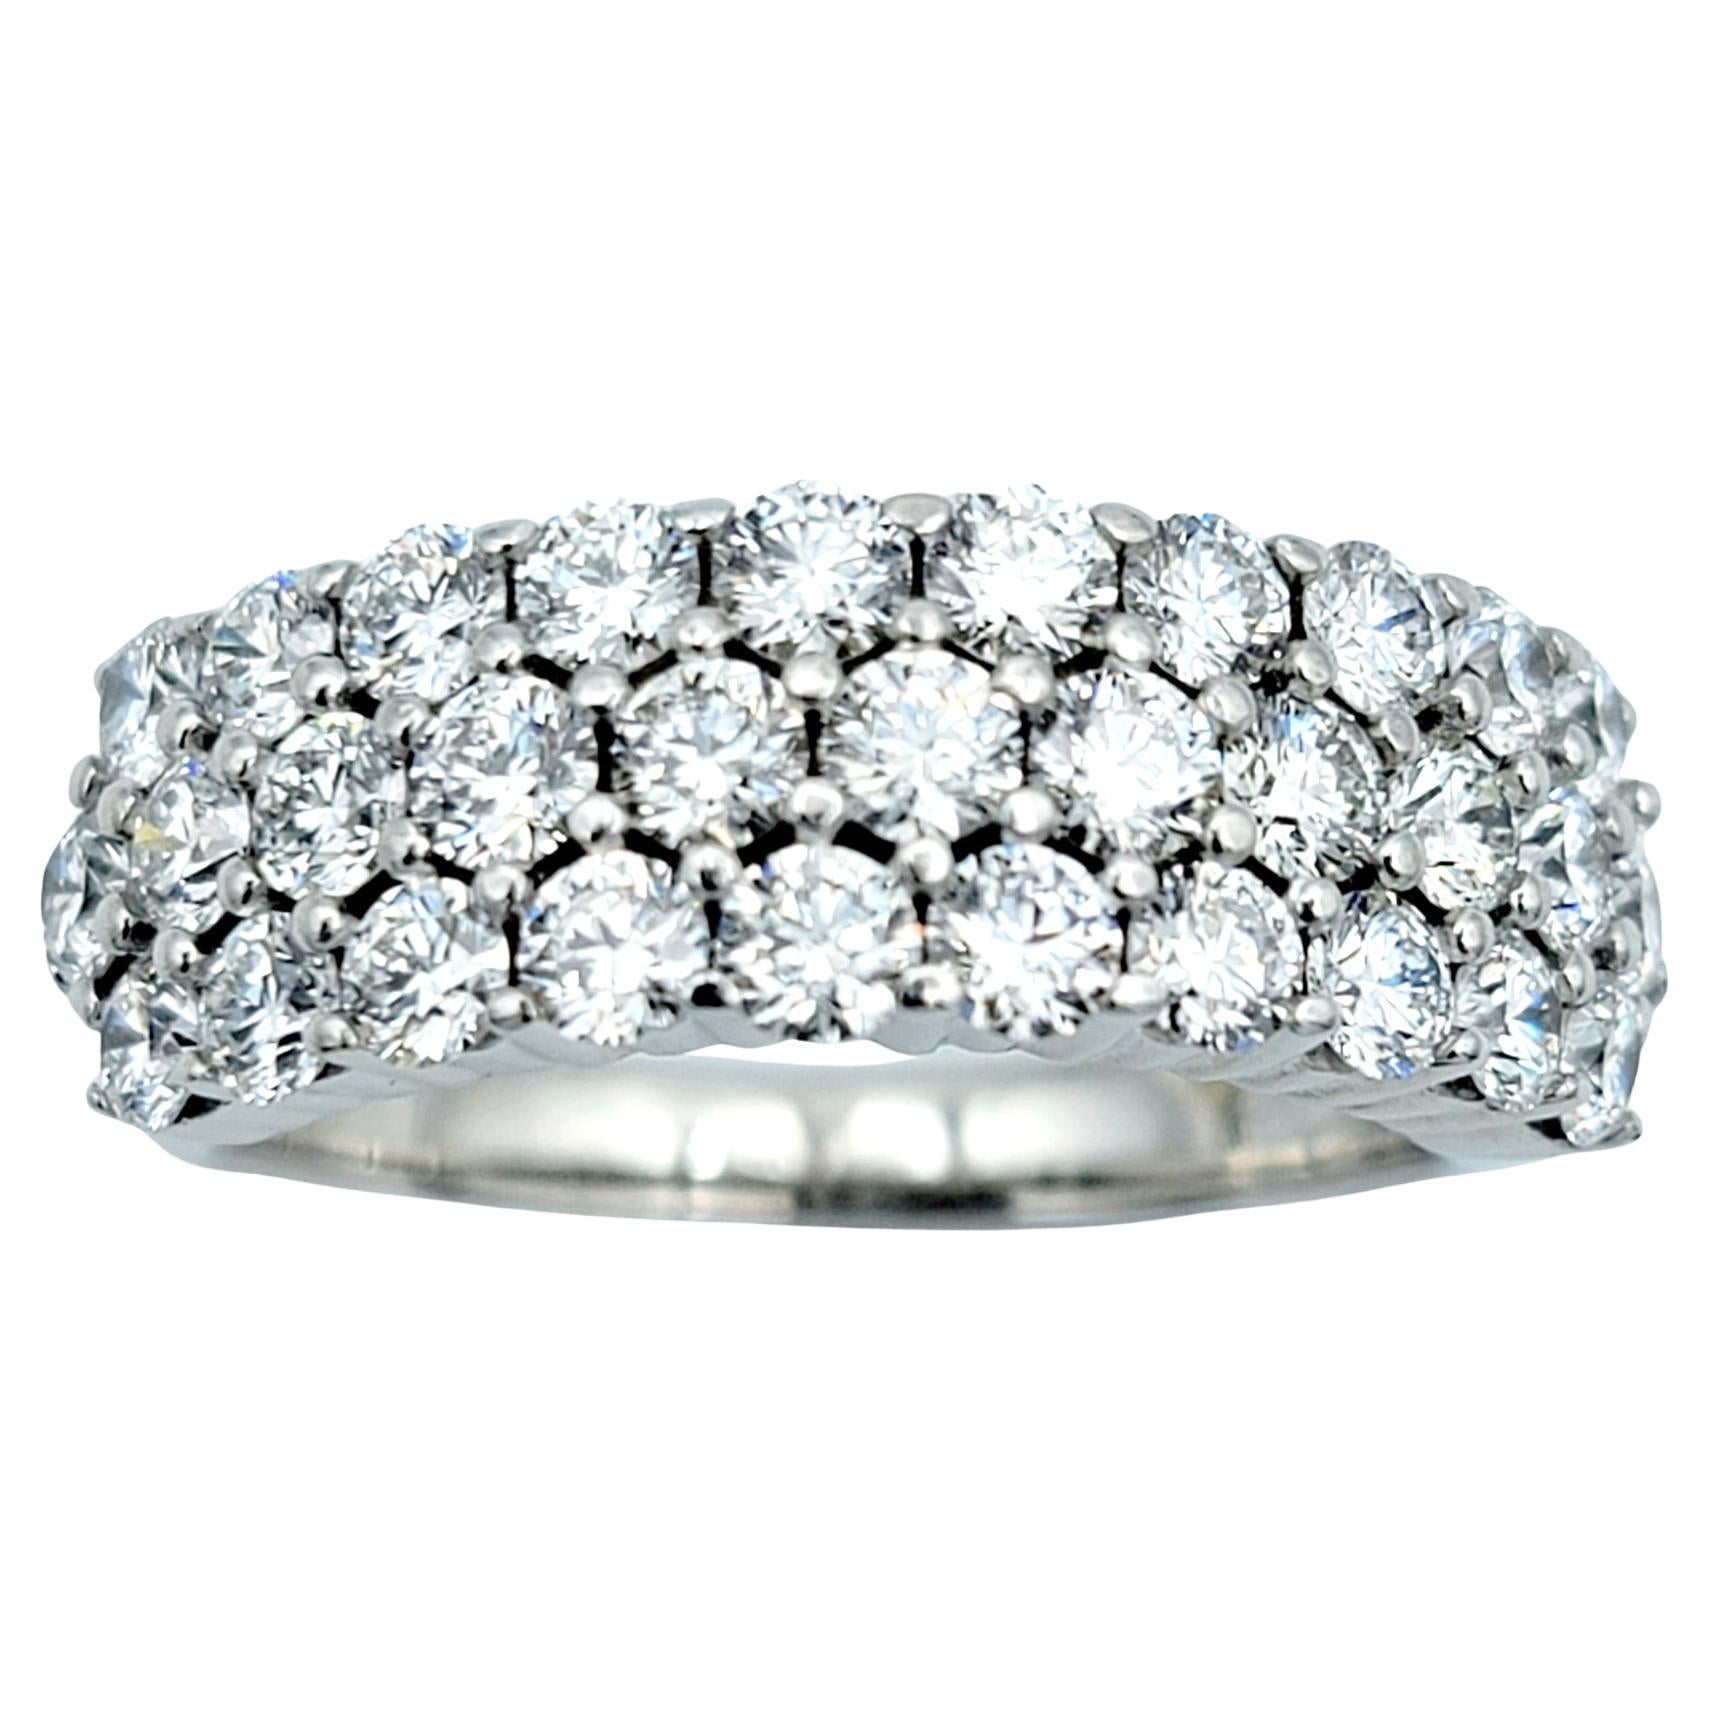 Ring size: 6.75

Elegance meets sophistication in this stunning three-row diamond band ring, meticulously crafted in lustrous 18 karat white gold. Designed to captivate and endure, this exquisite piece exudes timeless charm and luxurious